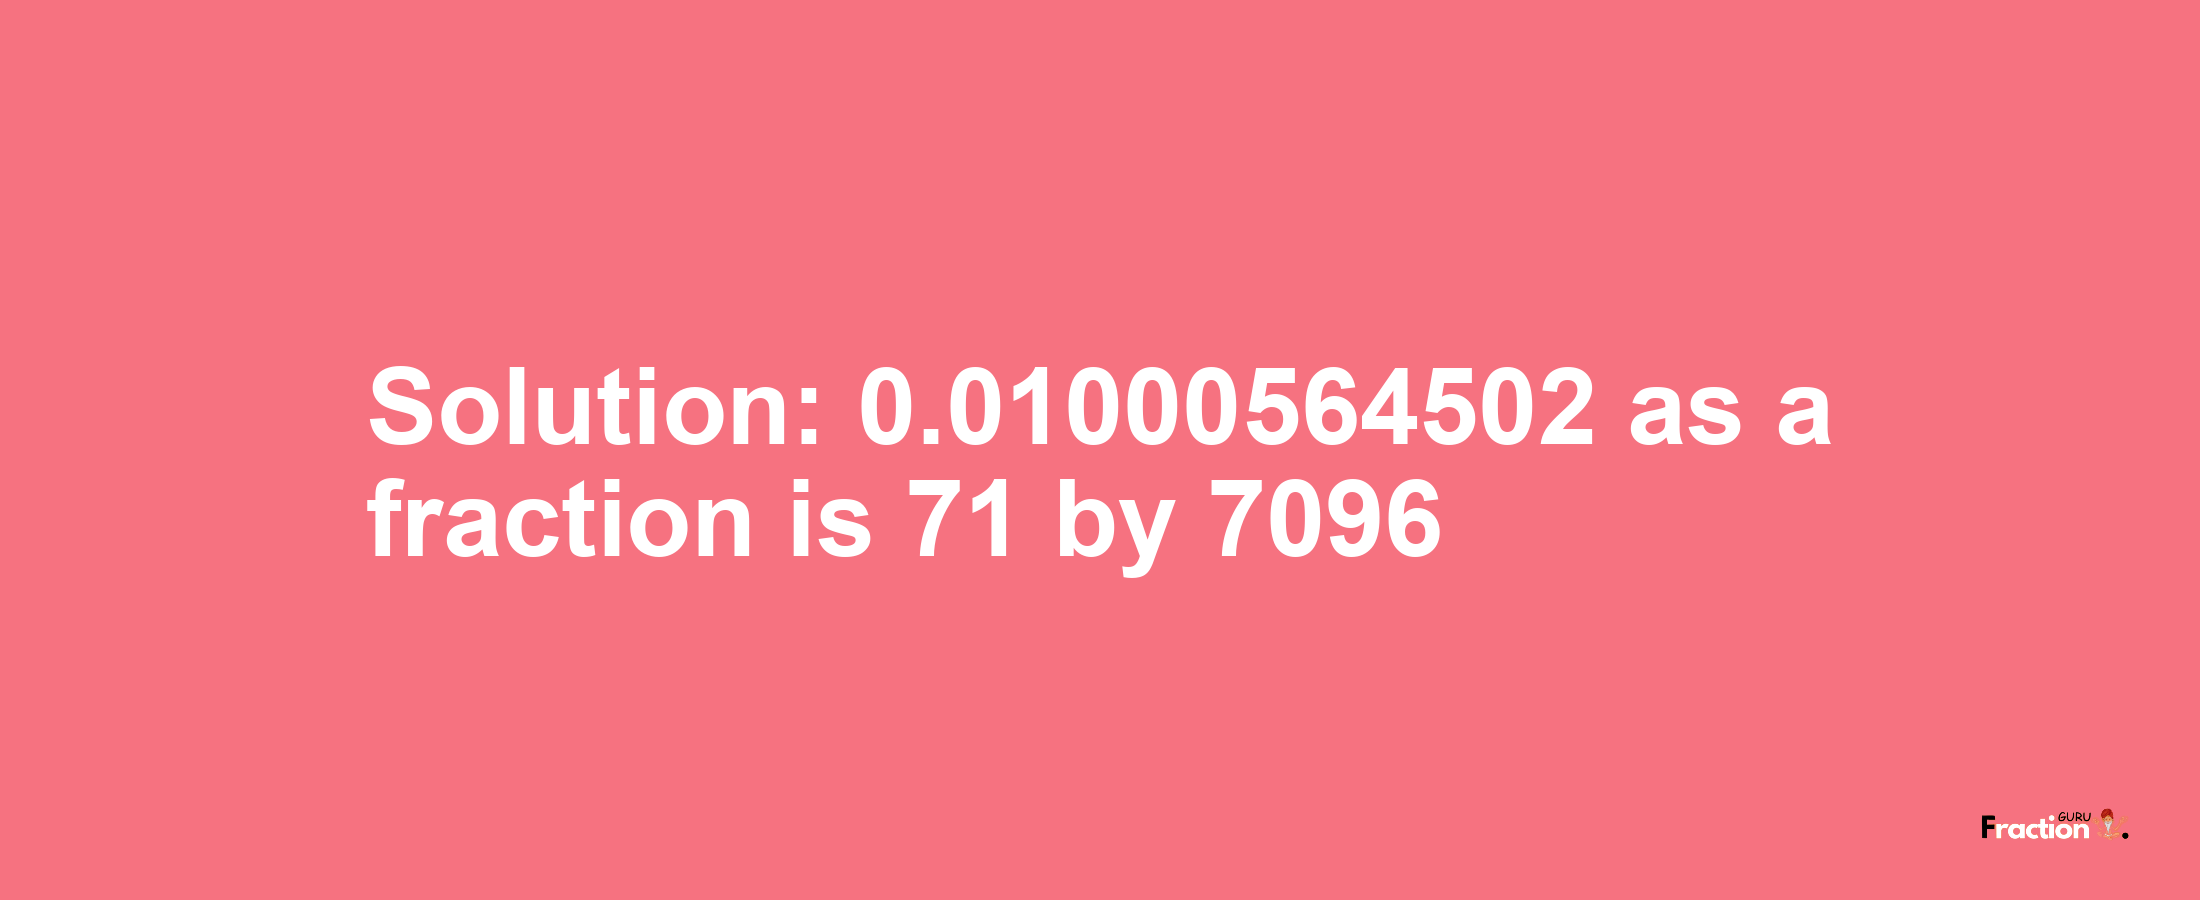 Solution:0.01000564502 as a fraction is 71/7096